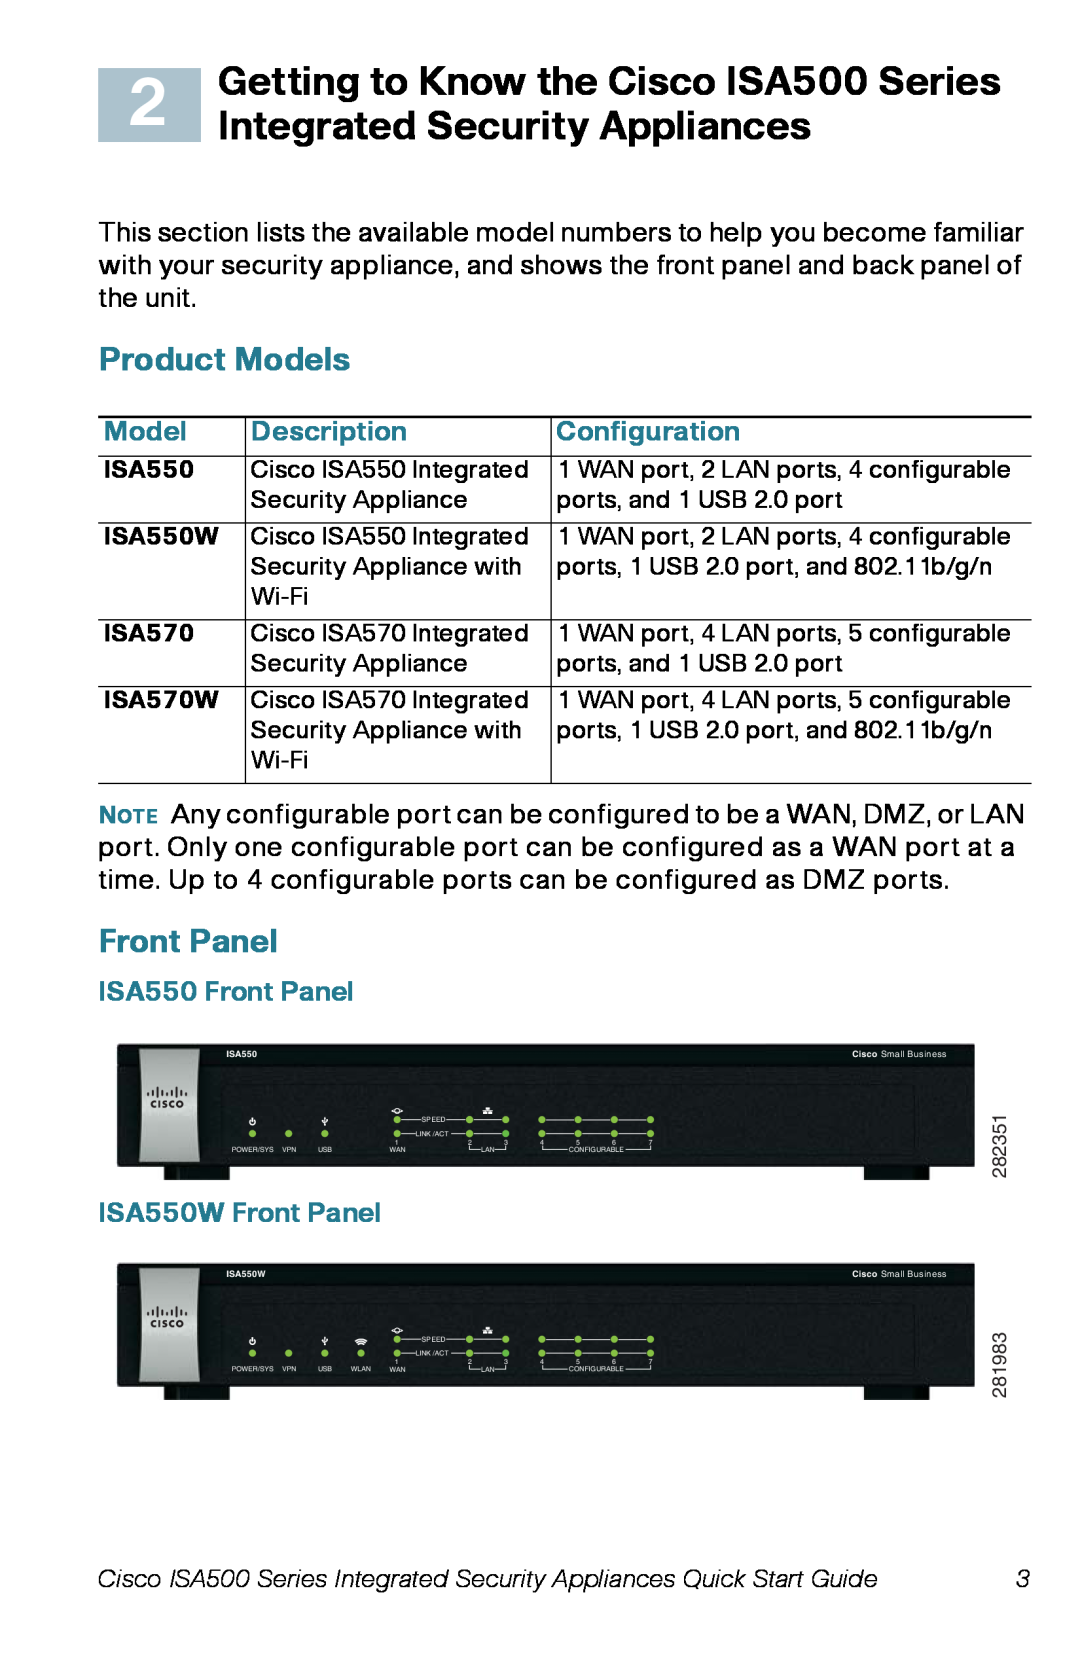 Cisco Systems ISA570 Getting to Know the Cisco ISA500 Series, Integrated Security Appliances, Product Models, Front Panel 